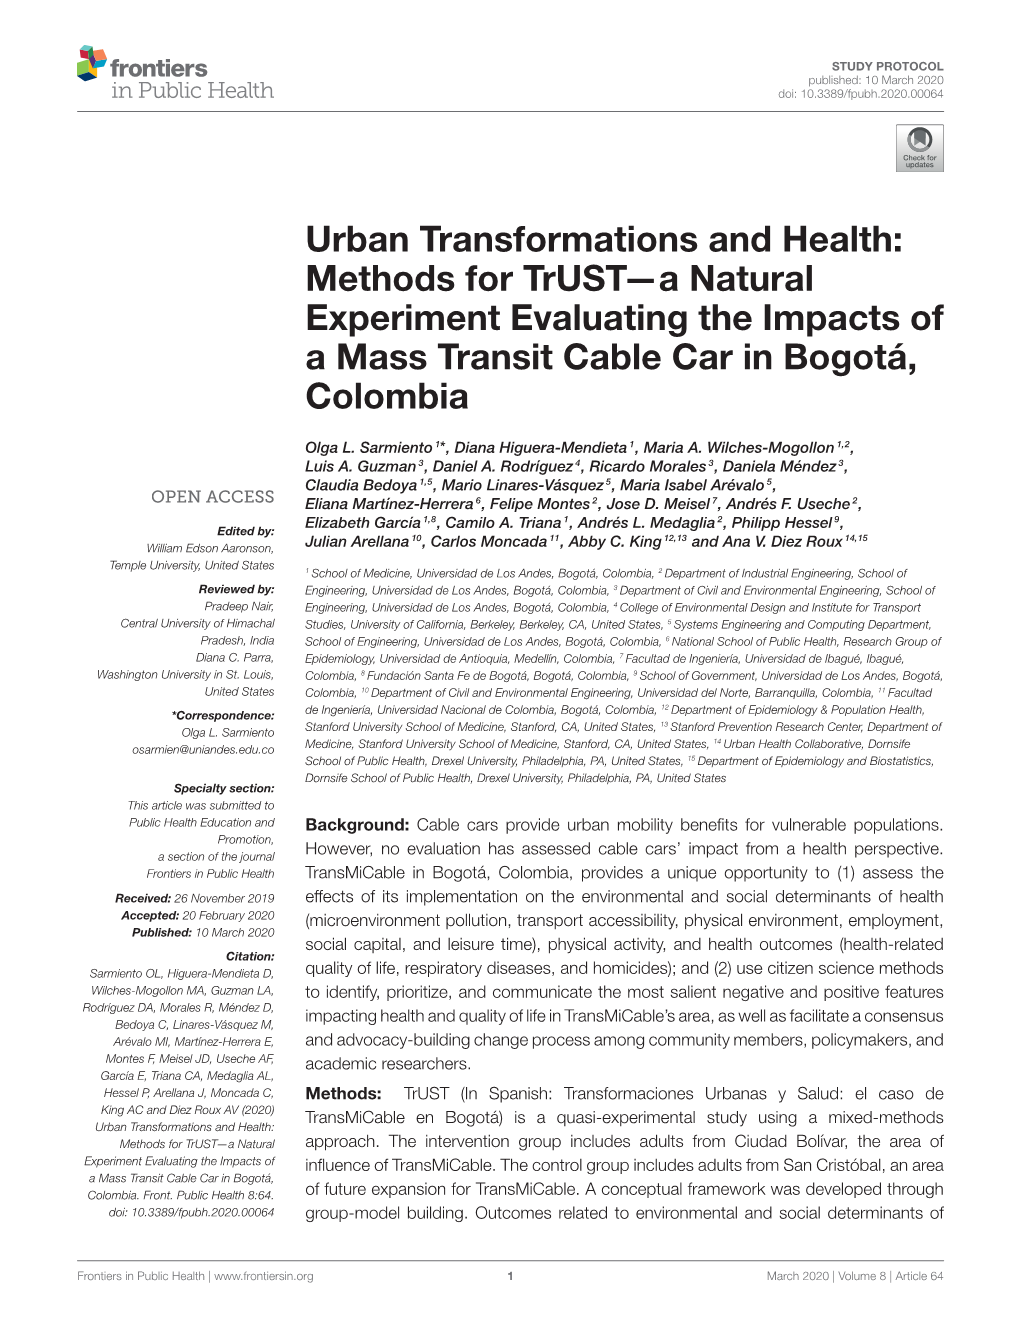 Urban Transformations and Health: Methods for Trust—A Natural Experiment Evaluating the Impacts of a Mass Transit Cable Car in Bogotá, Colombia